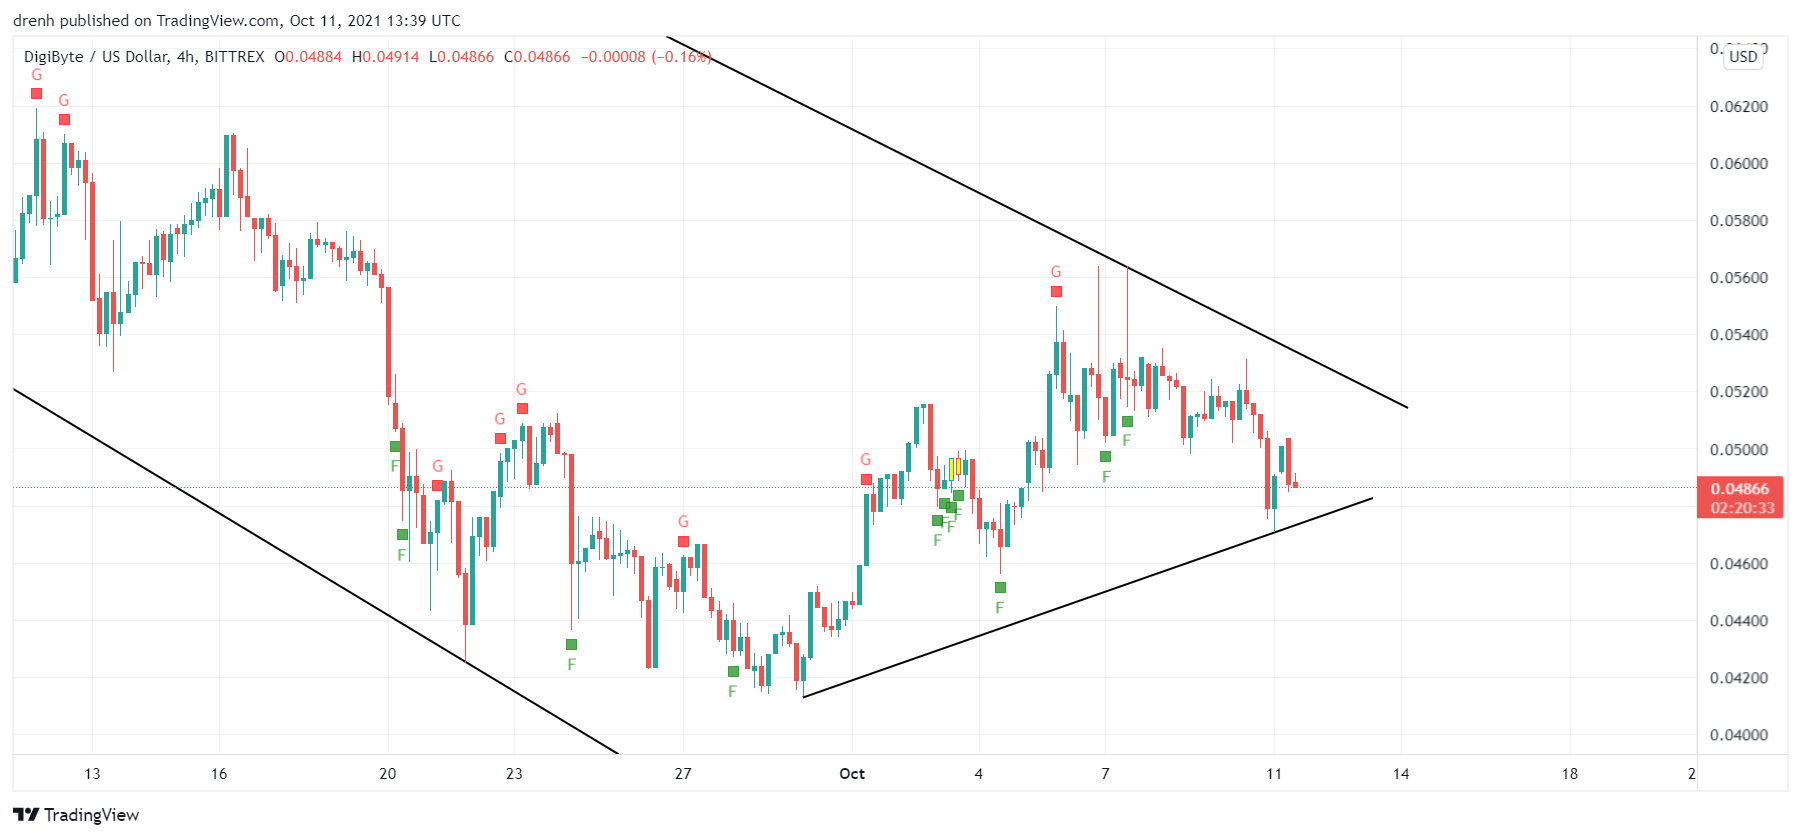 DigiByte Price Prediction October 2021: Will DGB Reach $0.50 In October?